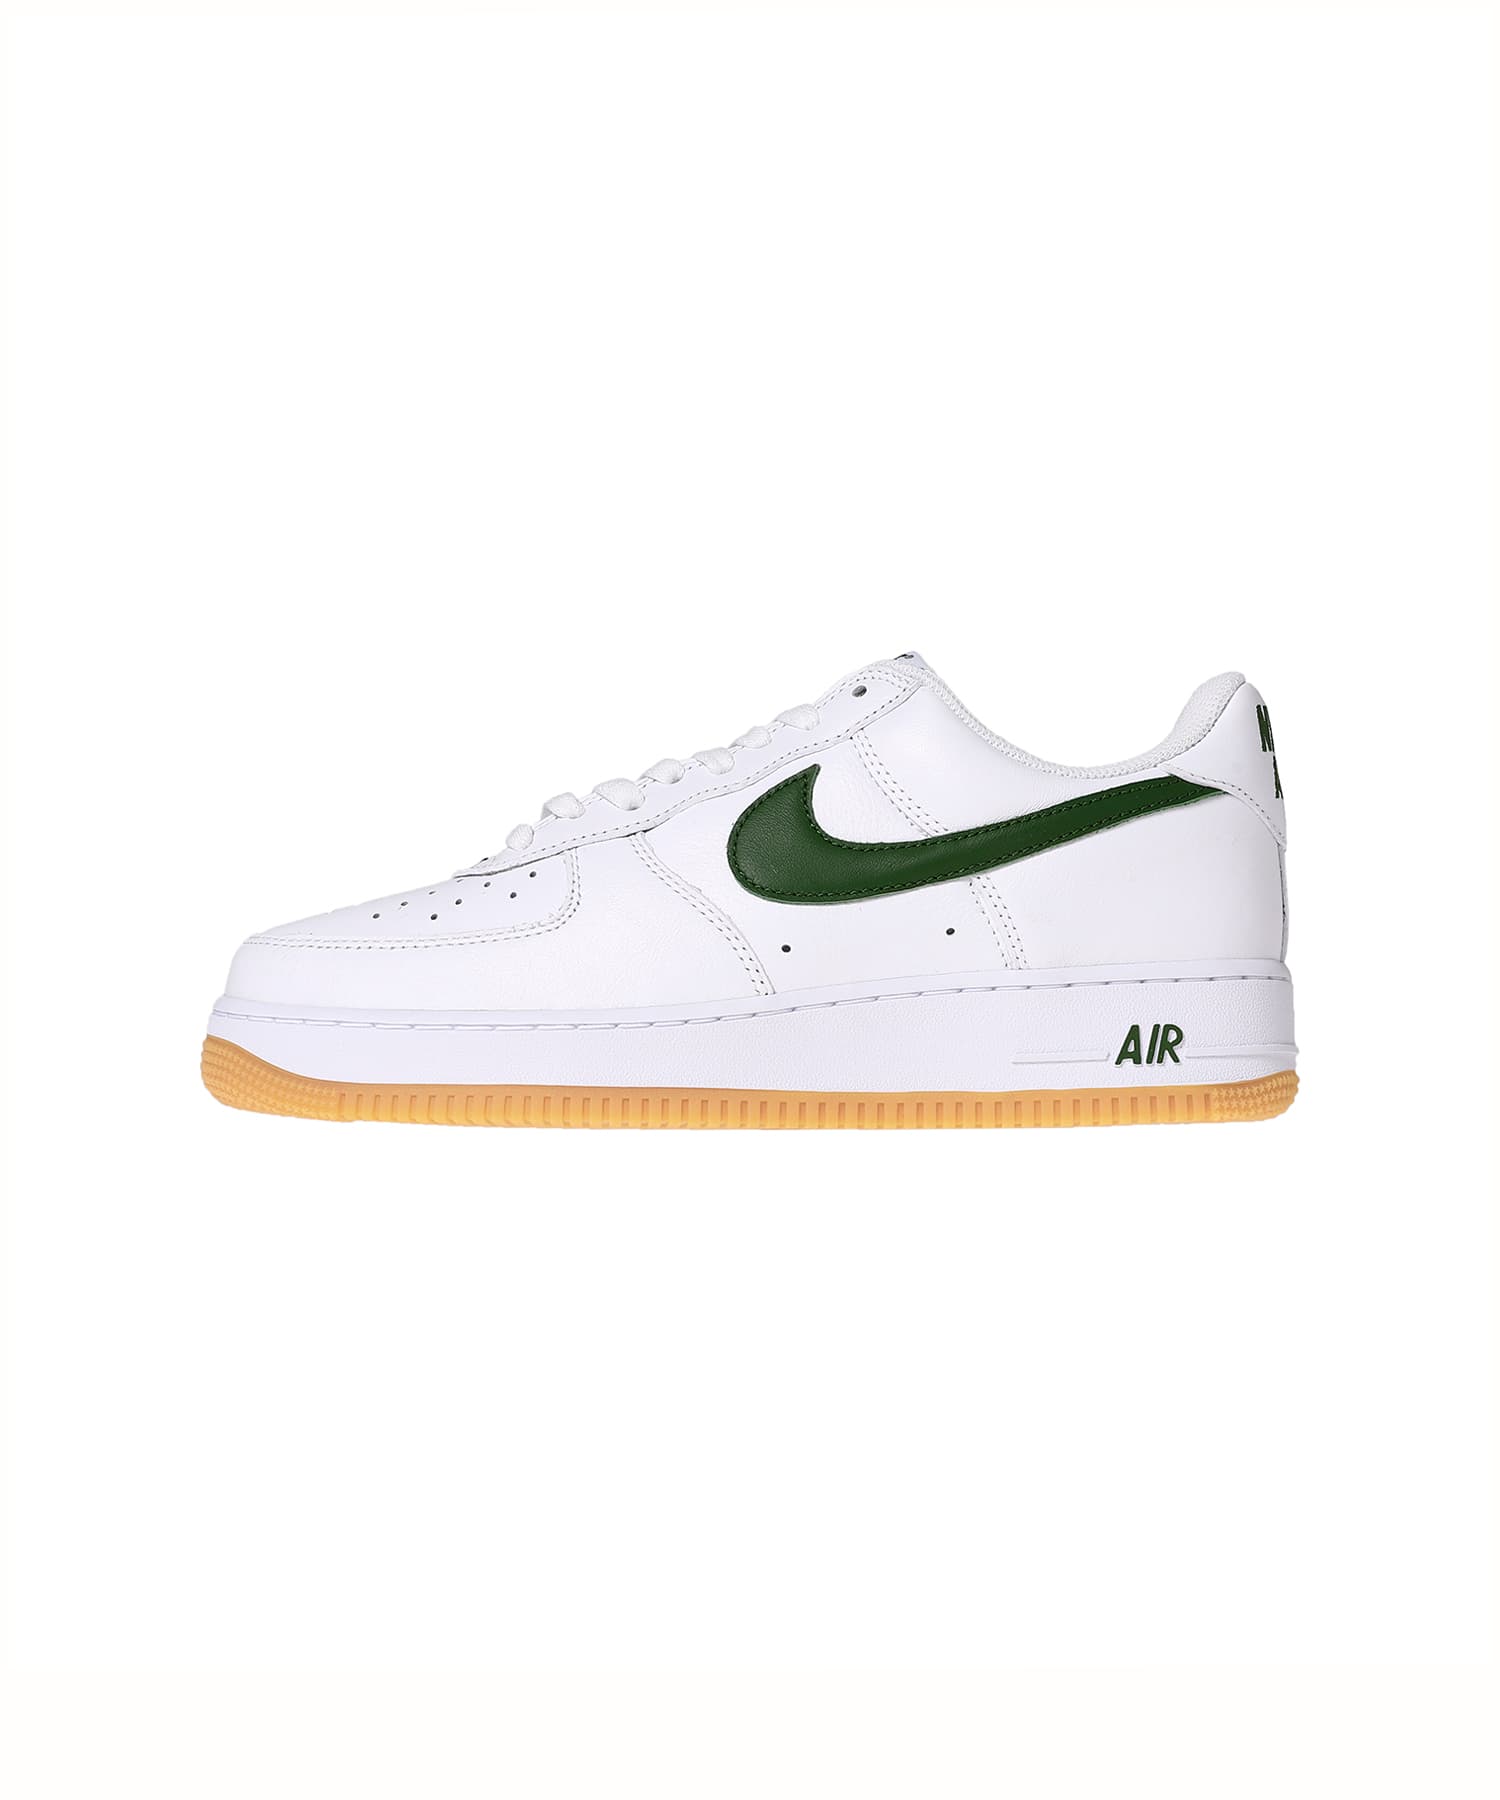 NIKE AIR FORCE 1 LOW RETRO "SILVER"27.5